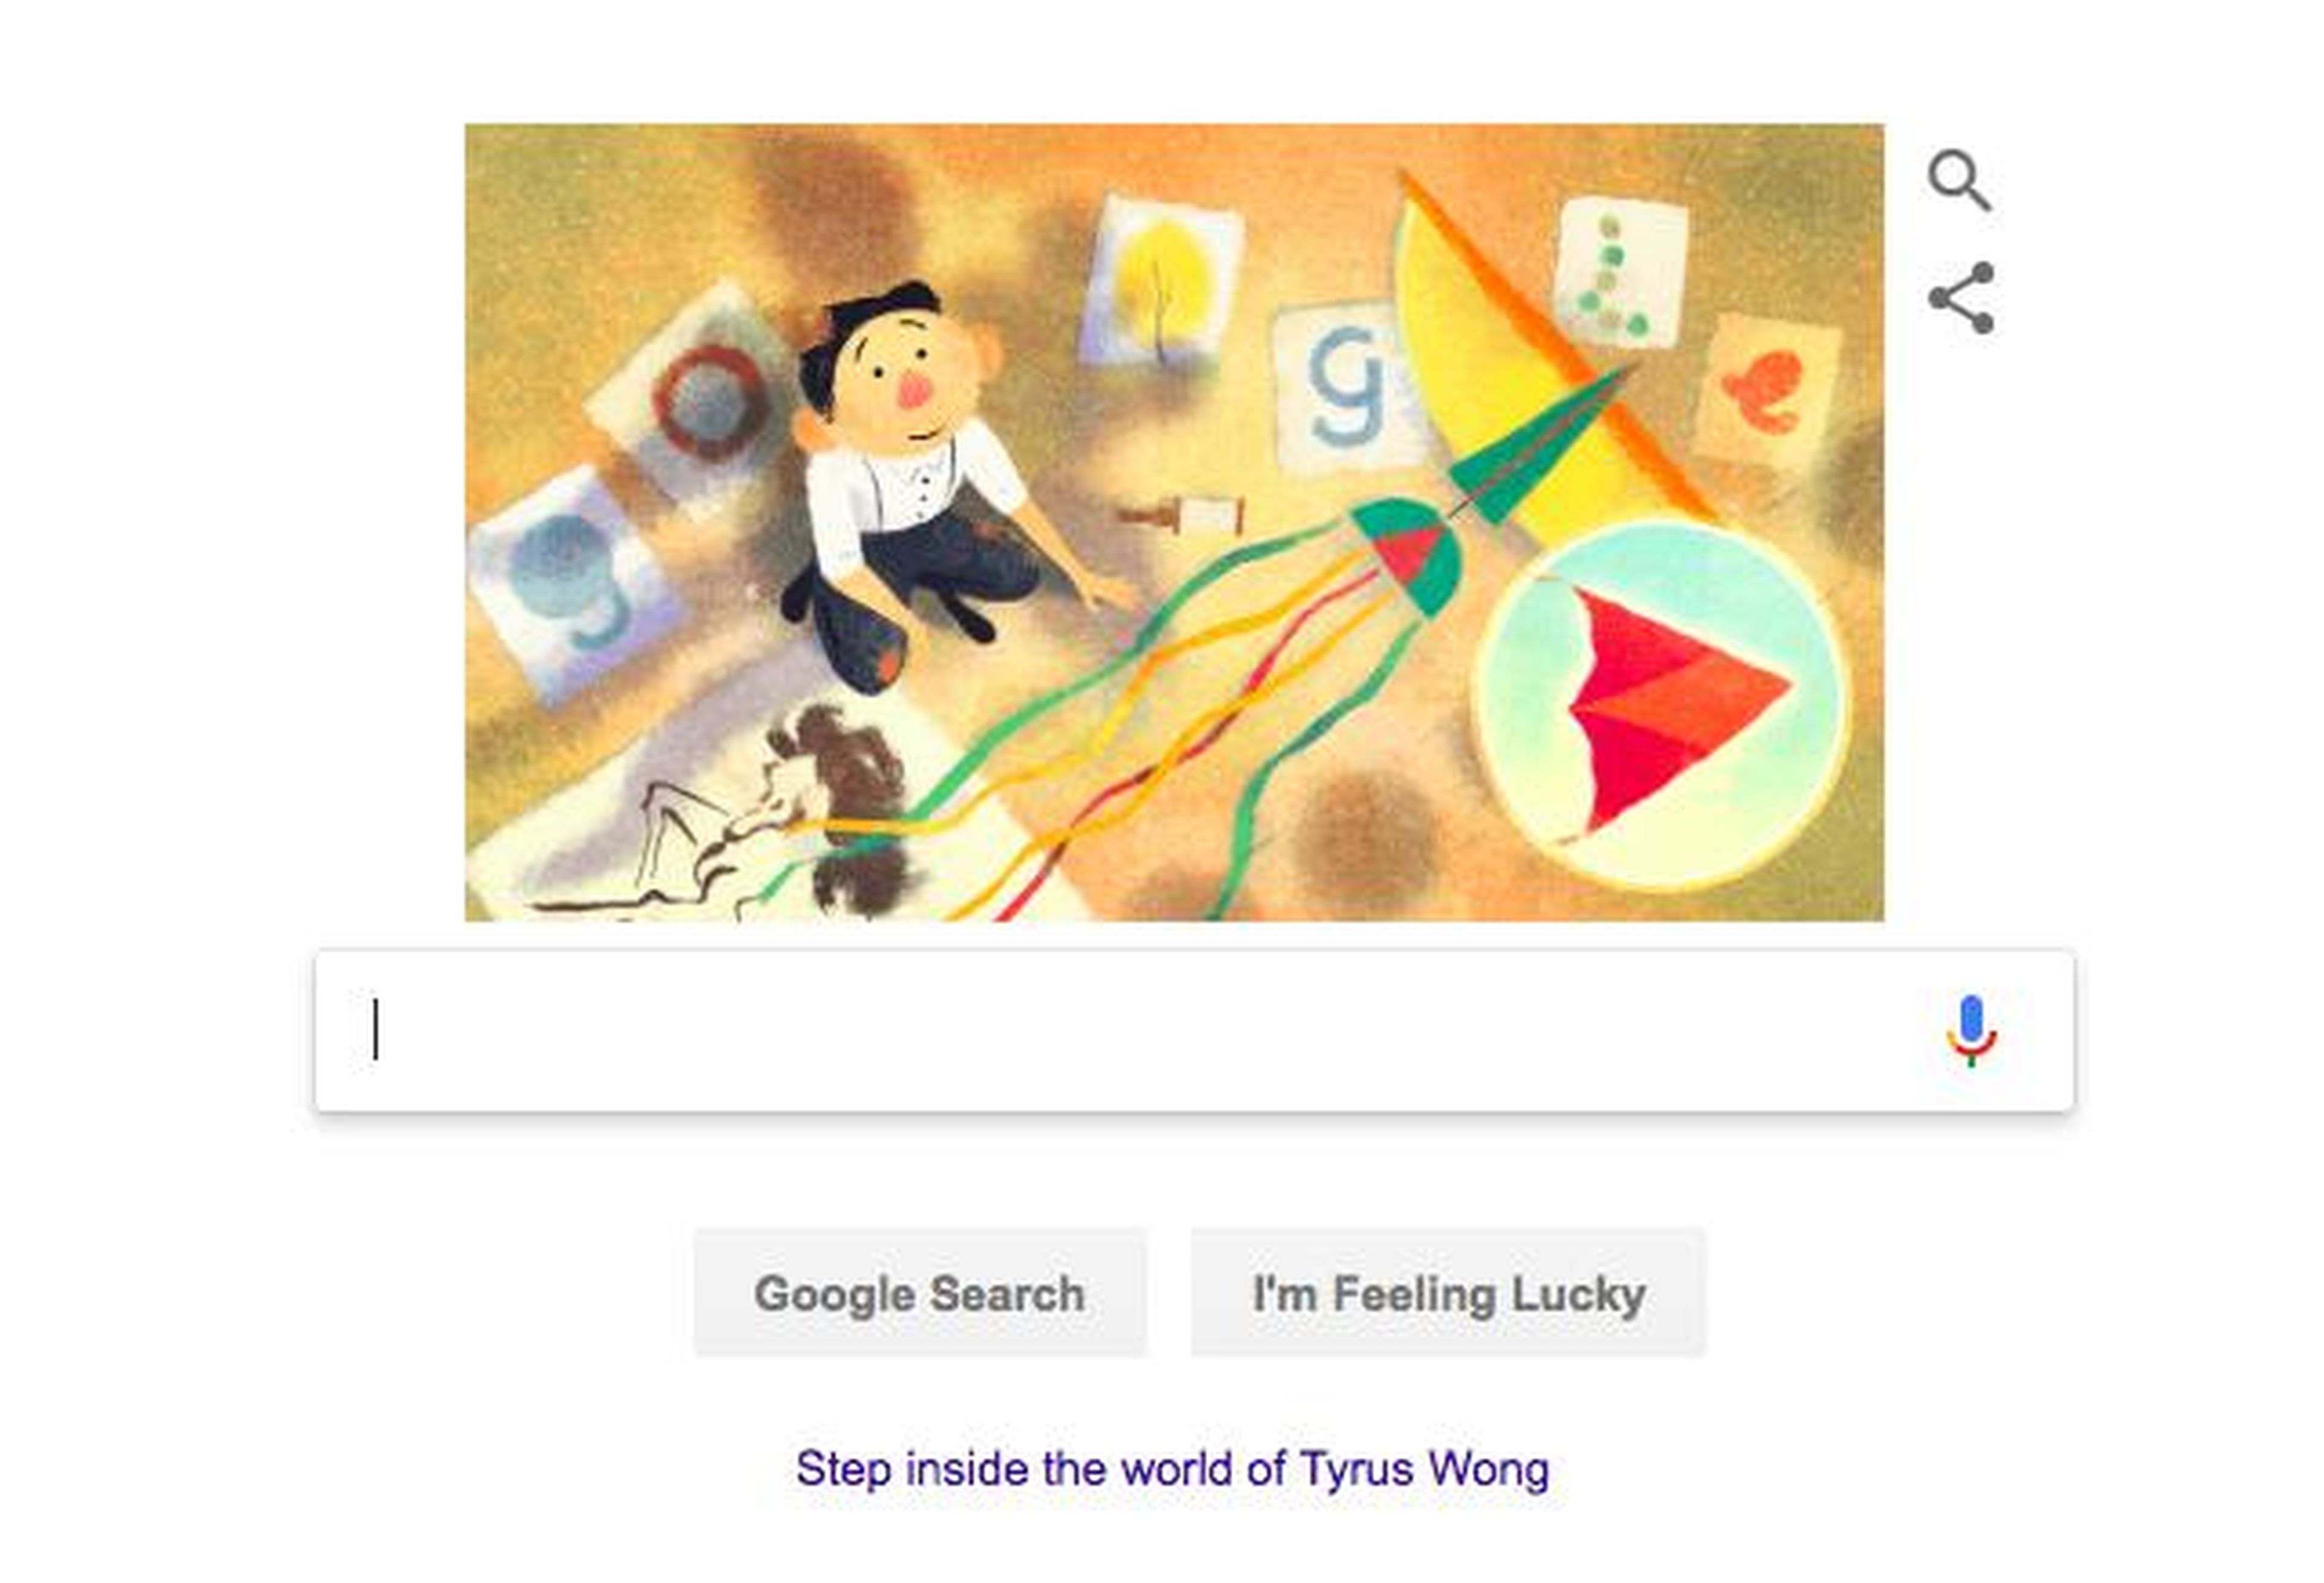 HOMEPAGES: The Google Doodle is hard to beat. Most days, Google offers up a new illustration that's often significant to that day.